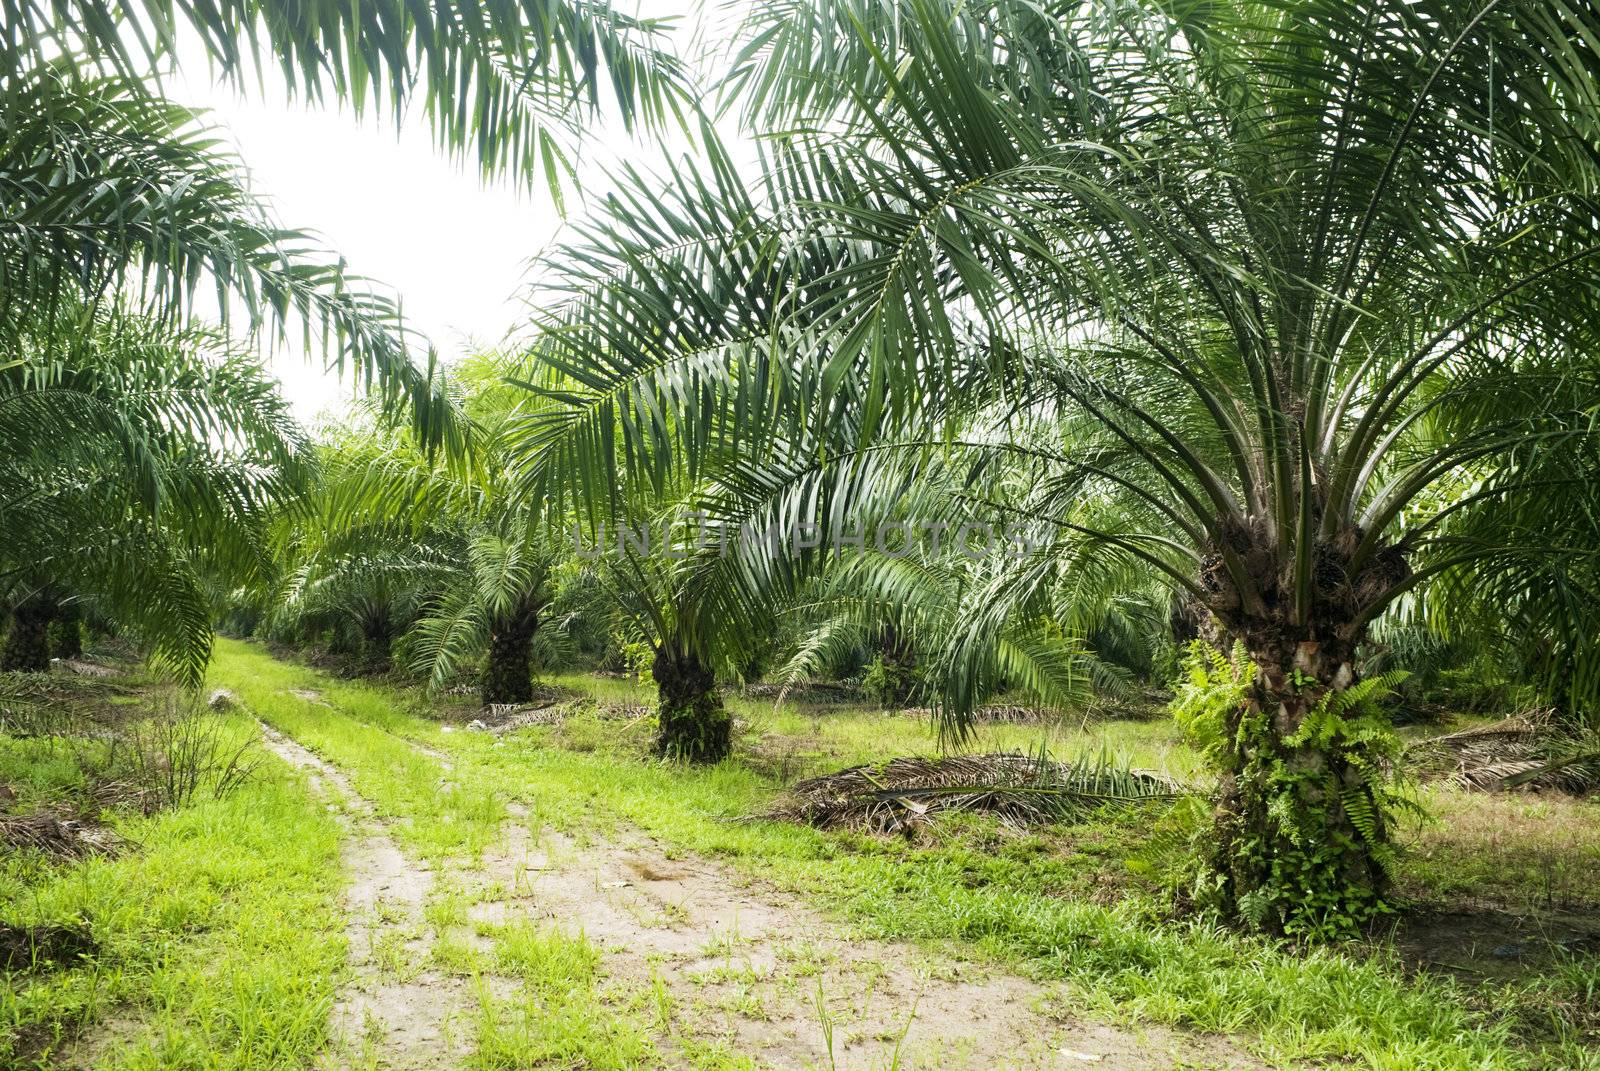 Palm oil to be extracted from its fruits. Fruits turn red when ripe. Photo taken at palm oil plantation in Malaysia, which is also the world largest palm oil exporting country.